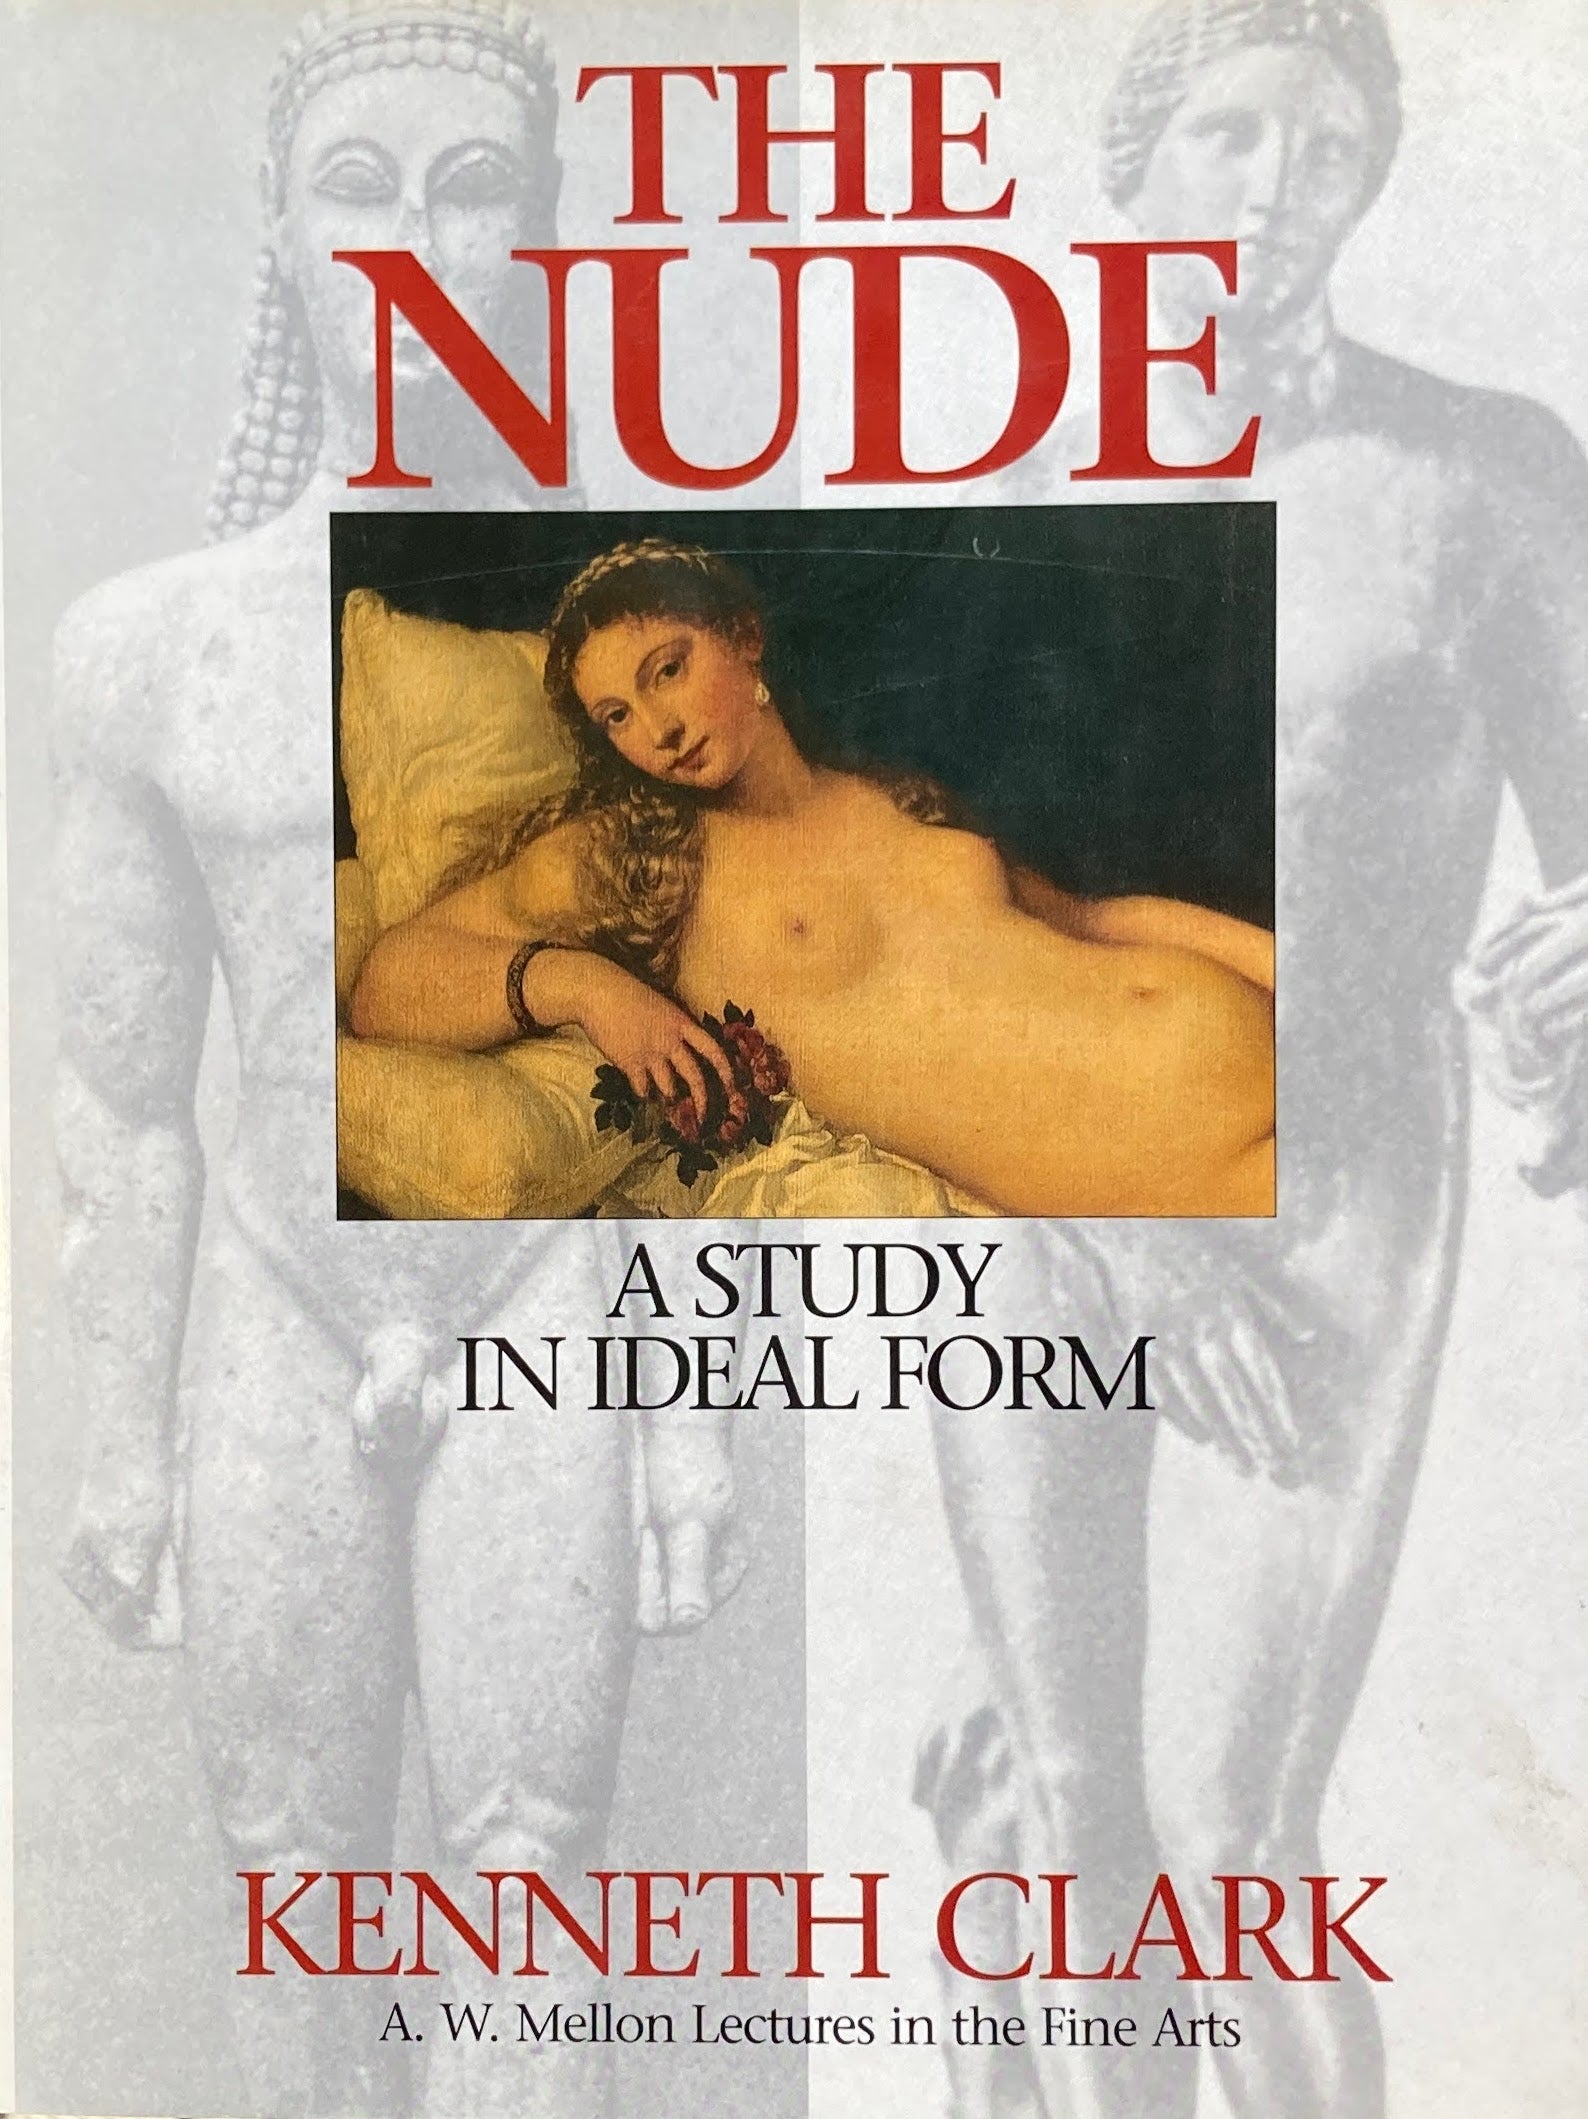 THE NUDE A STUDY IN IDEAL FORM　Kenneth Clark